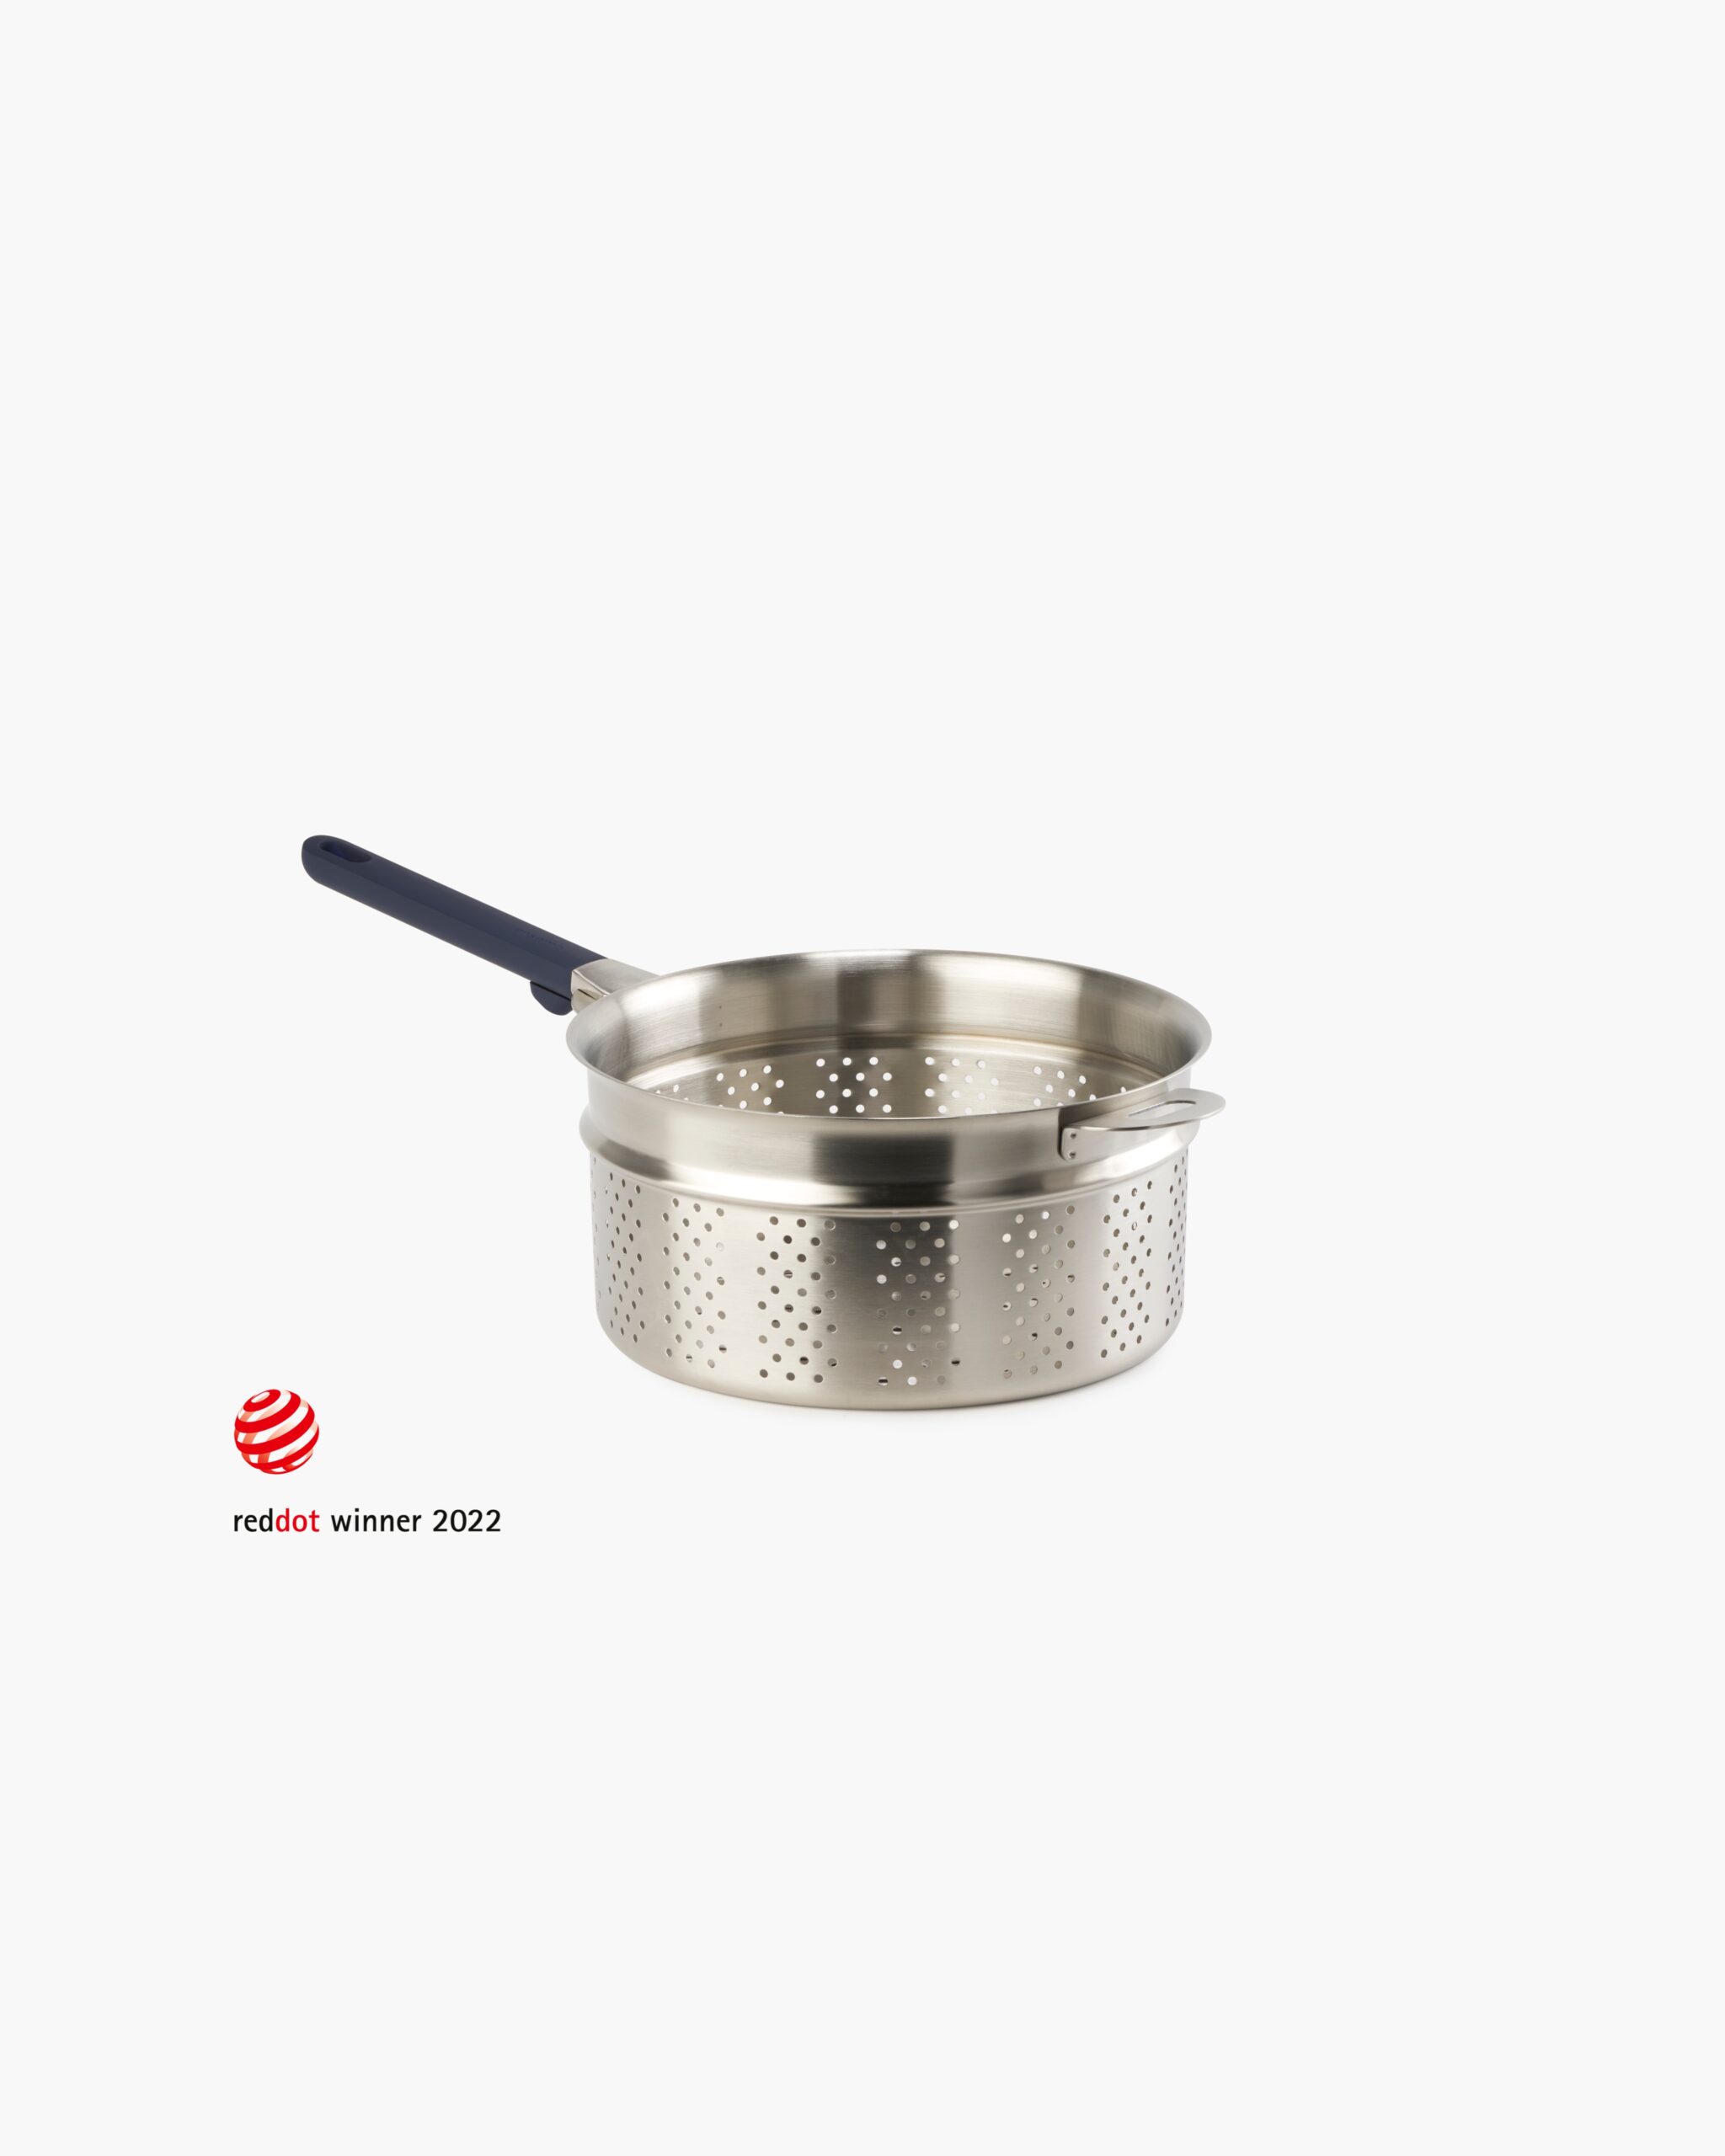 Best All Purpose Steamer and Colander with Lid, Perfect Pasta Pot Insert  with Removable Handle